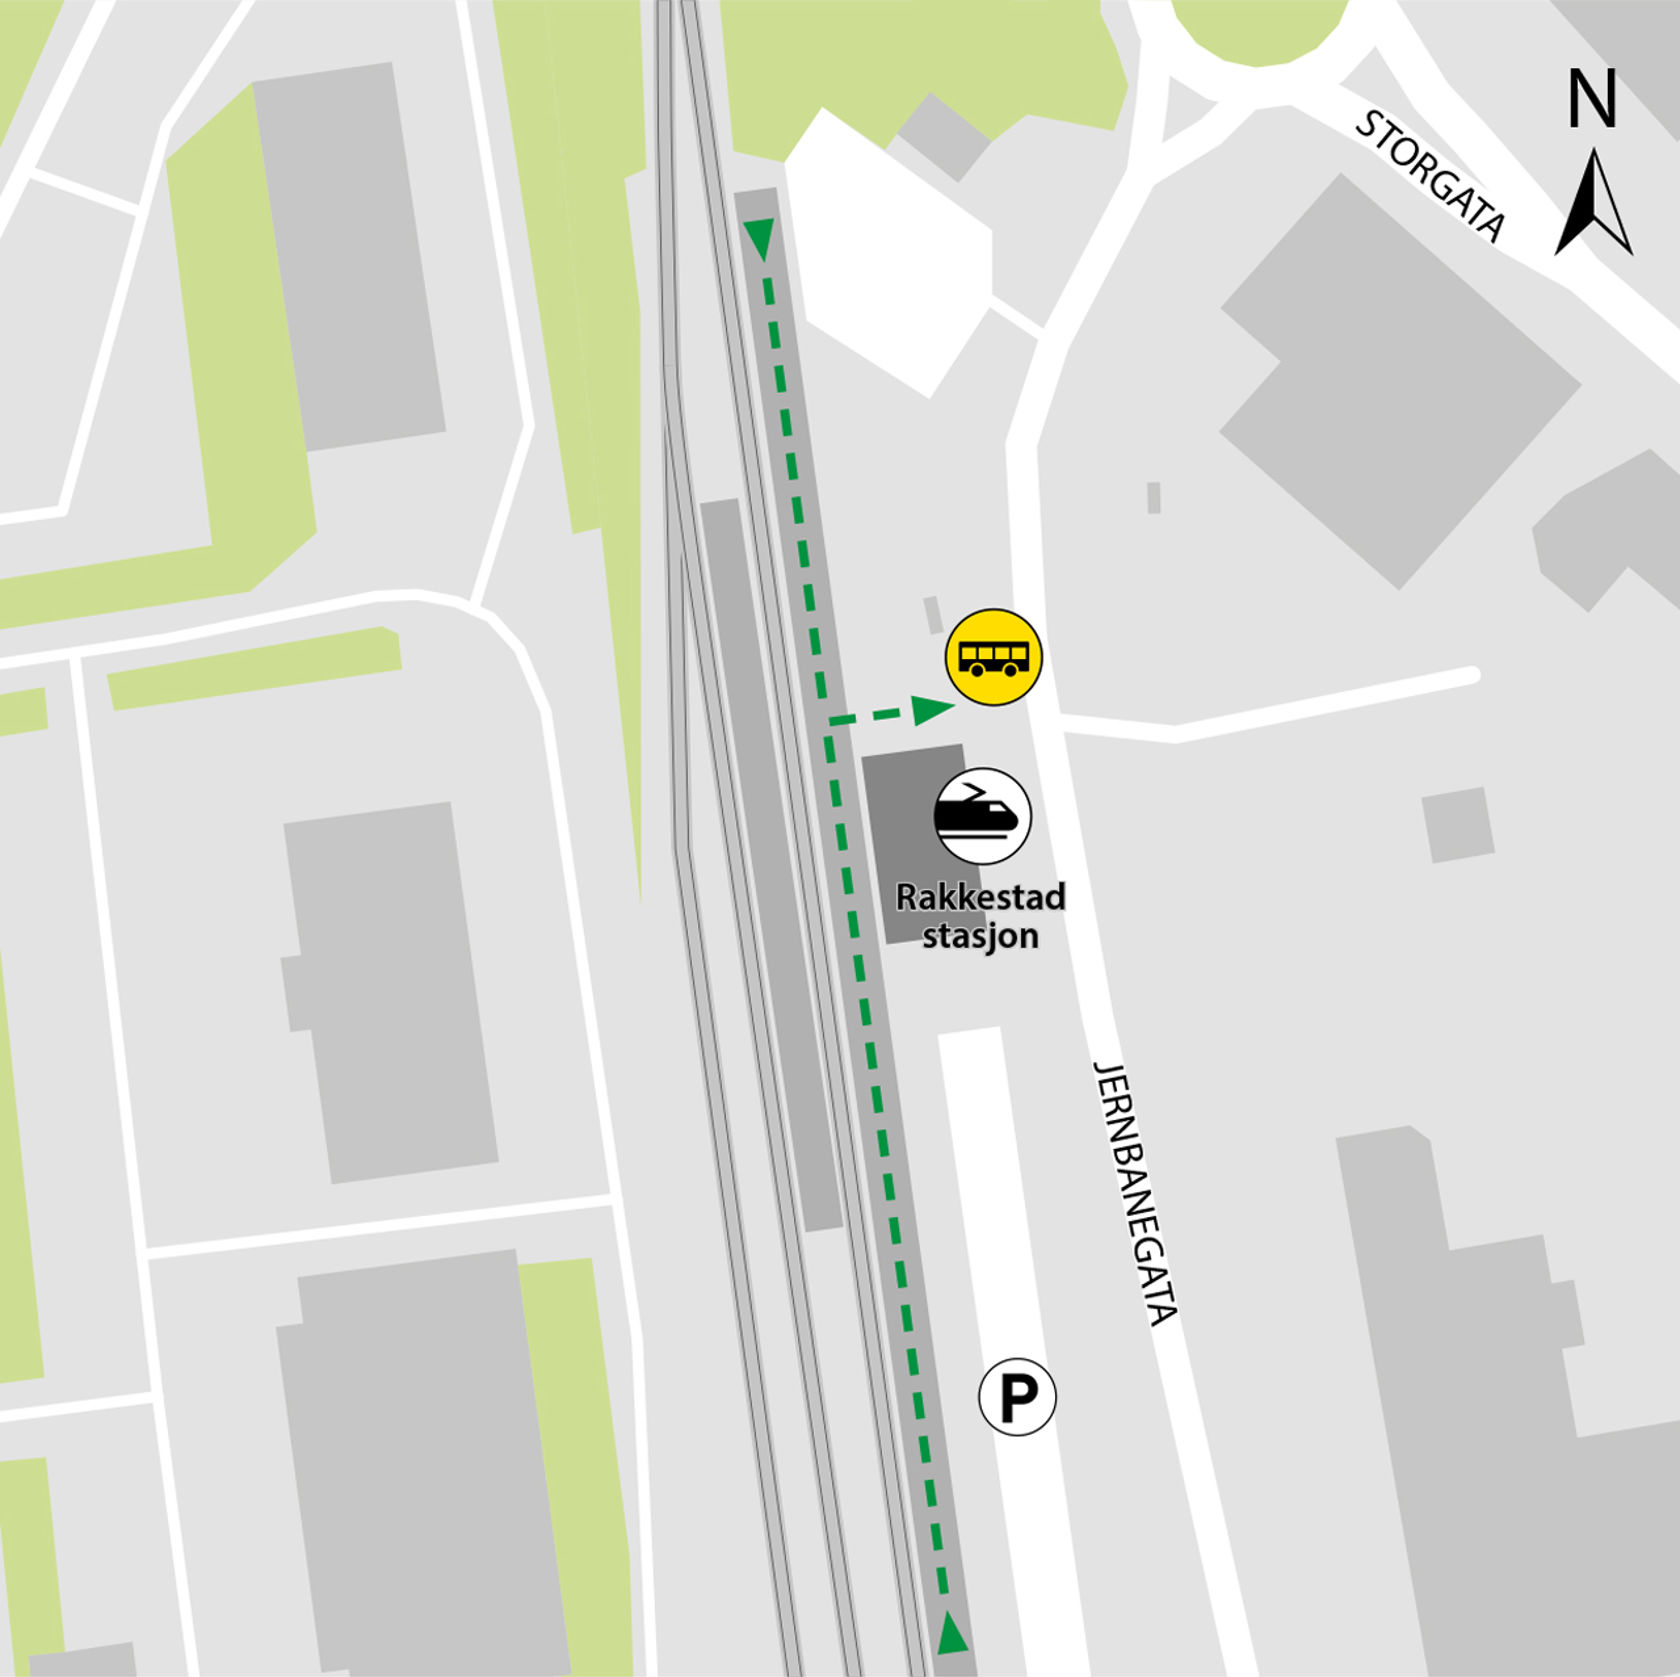 Map shows rail replacement service departs from bus stop Rakkestad station.